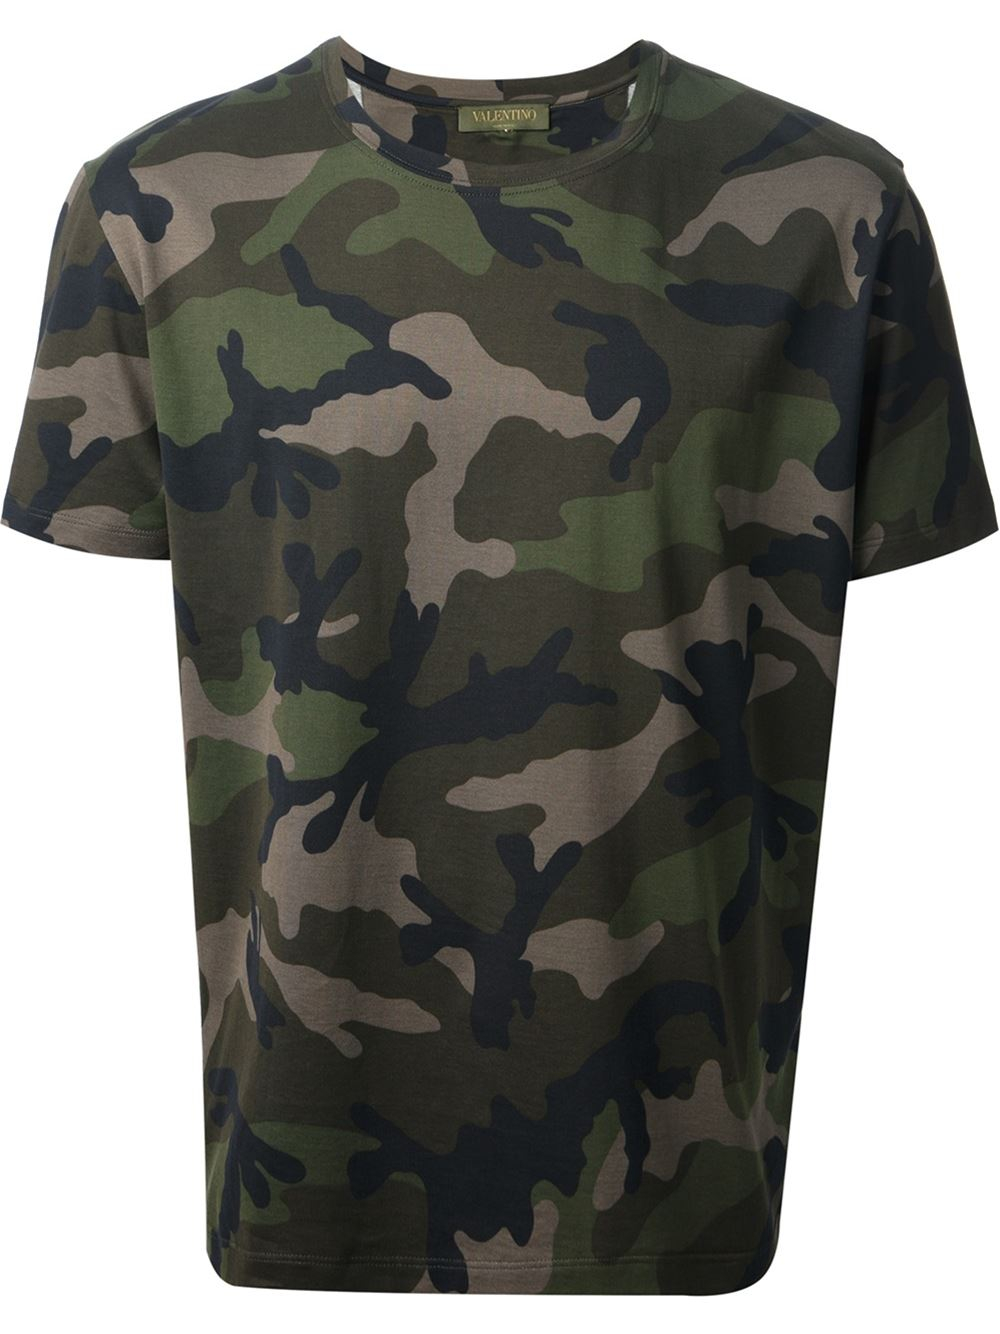 Valentino Camouflage Tshirt in Green for Men - Lyst